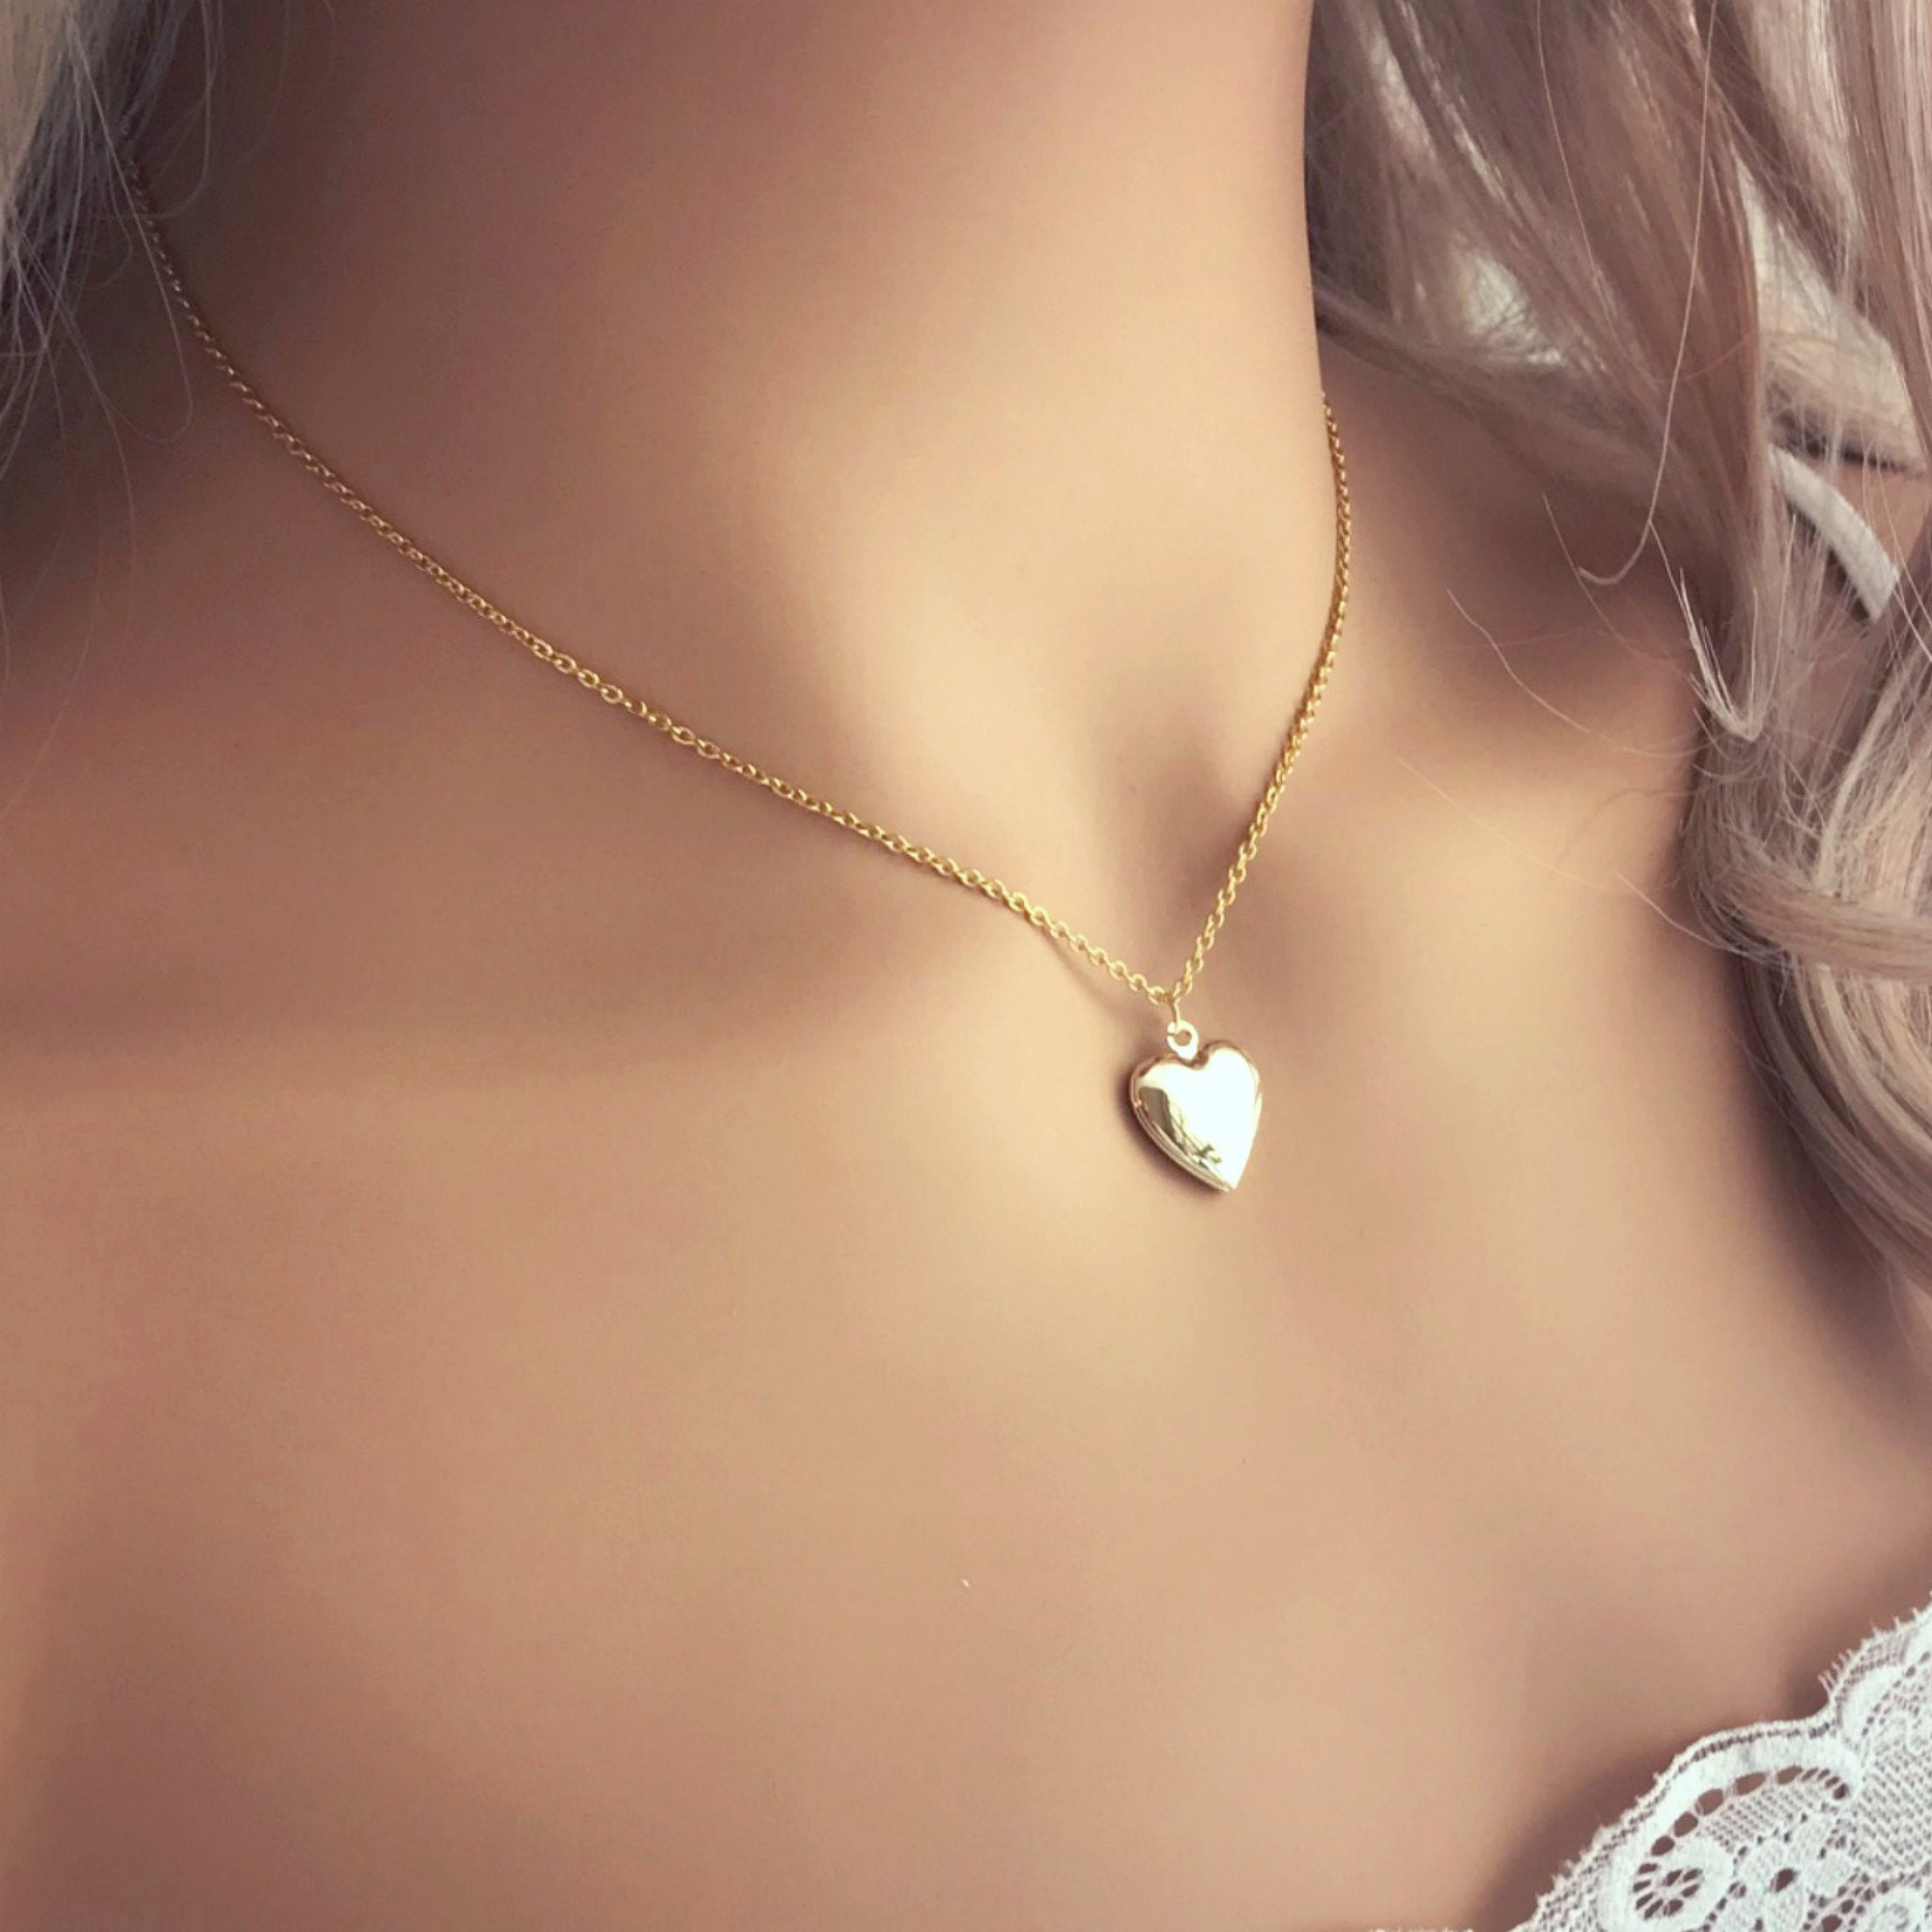 Heart Locket Necklace with Picture Inside - Rose Gold –